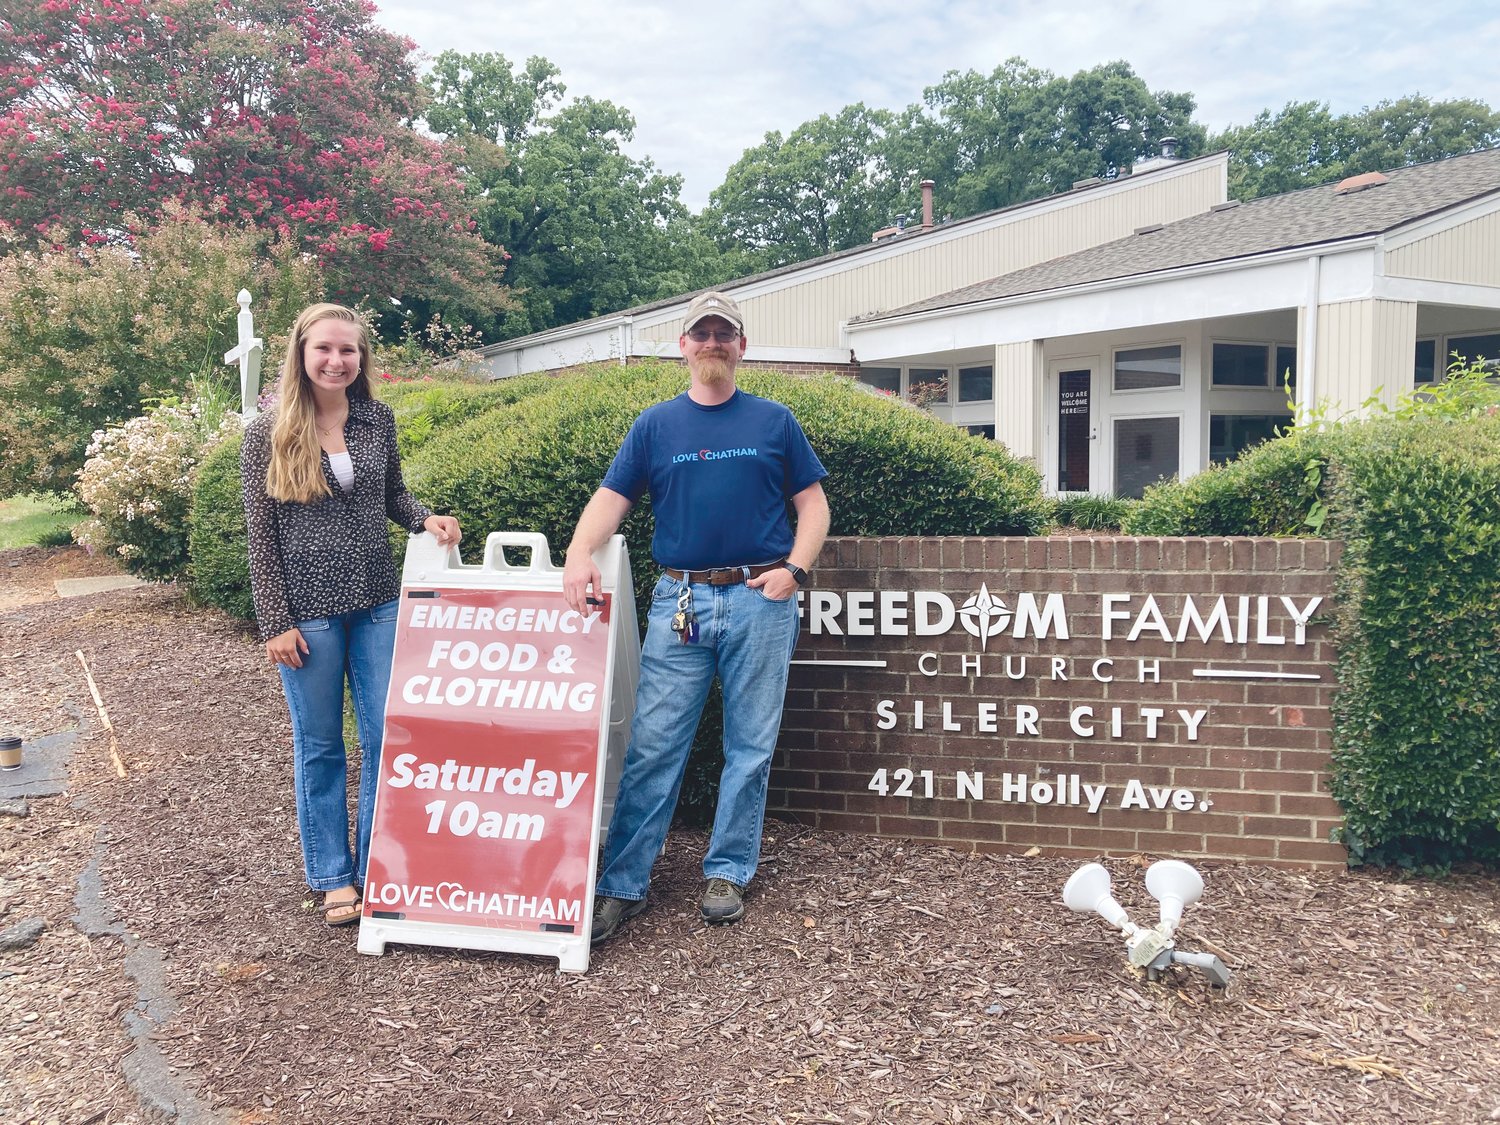 Love Chatham intern Mary Lacey Eubanks (left) and Dakota Philbrick, the nonprofit's executive director, stand in front of Freedom Family Church in Siler City, where Love Chatham is headquartered.